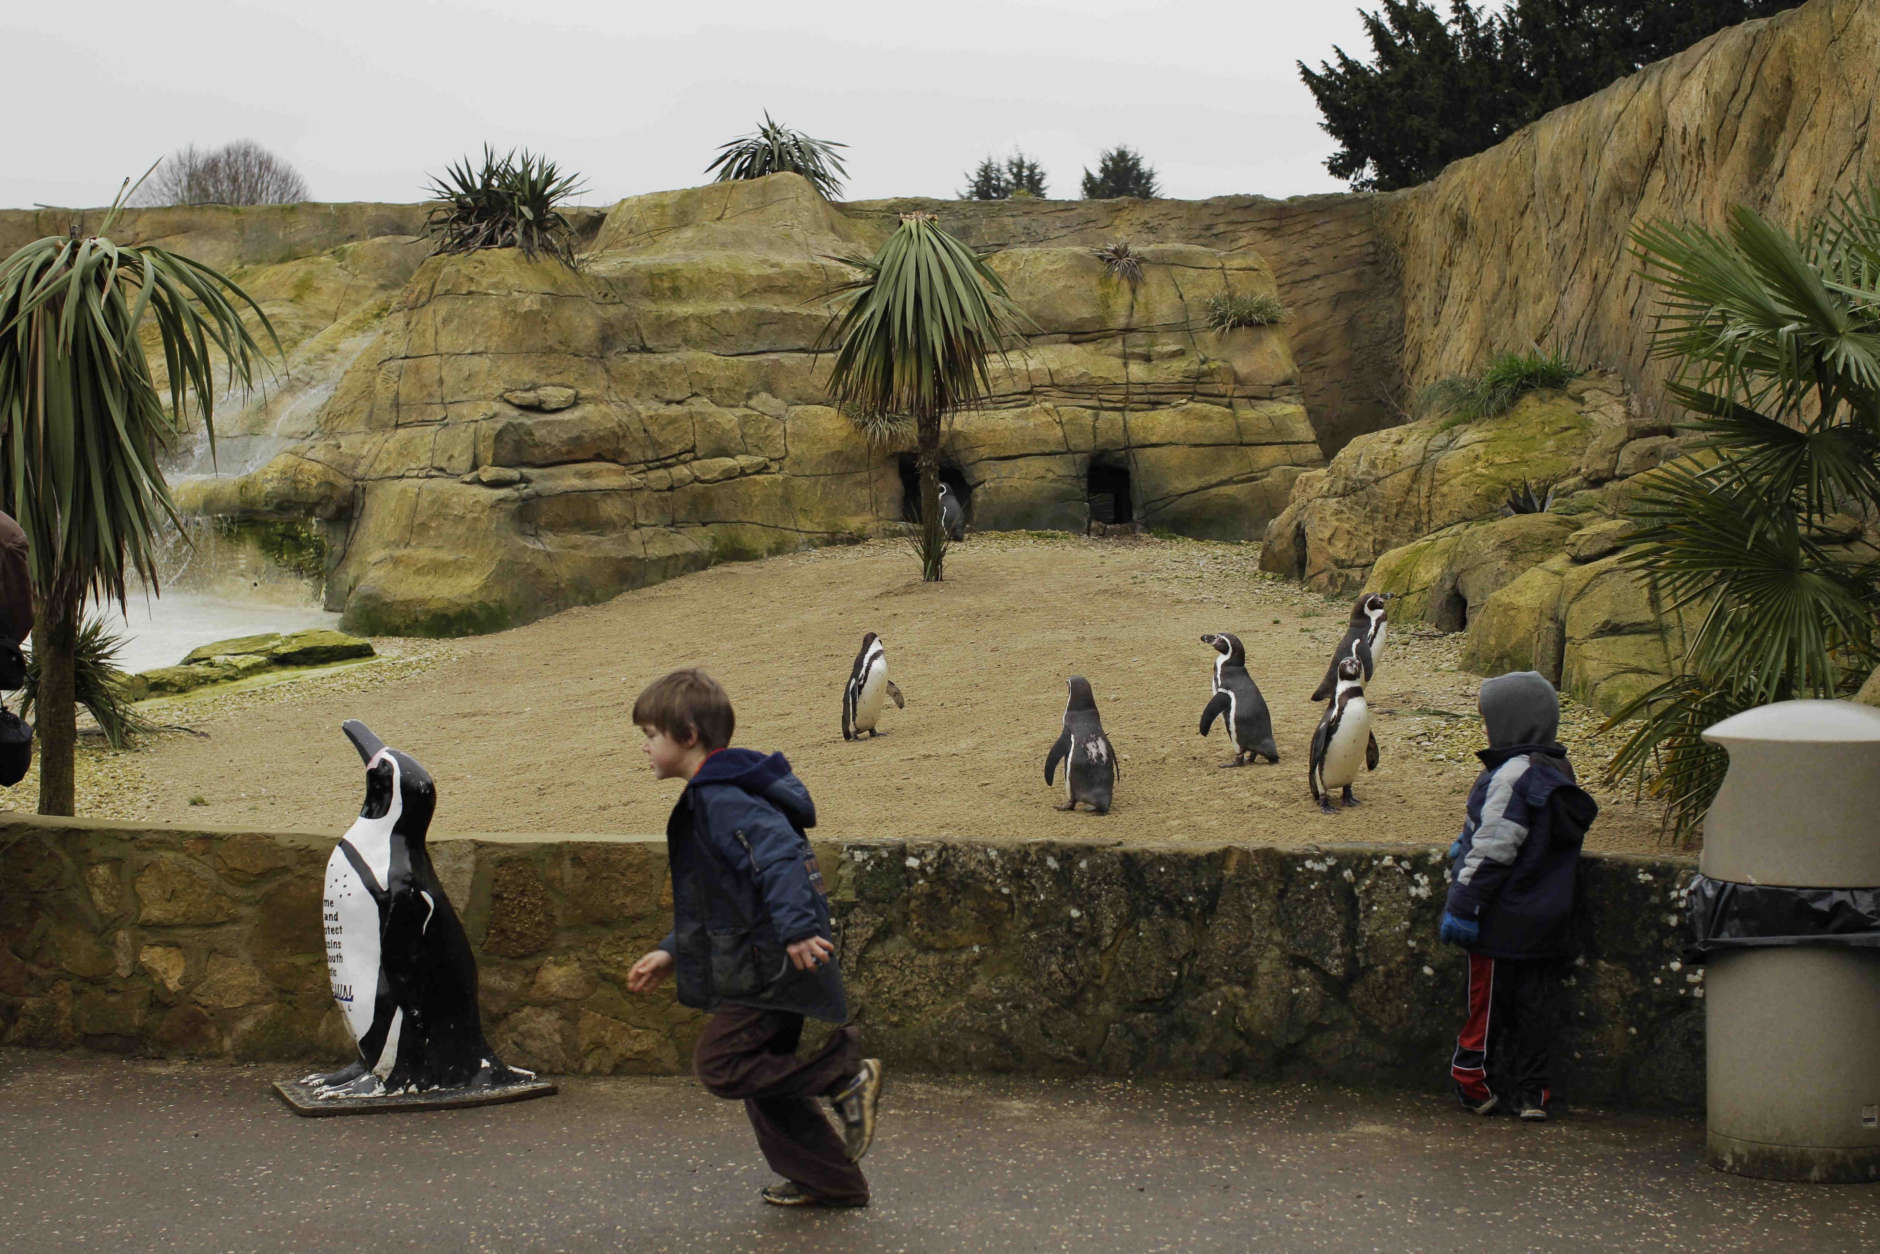 Penguins stand in their enclosure at the Cotswold Wildlife Park near Burford, England, Sunday, Feb. 20, 2011.  (AP Photo/Matt Dunham)